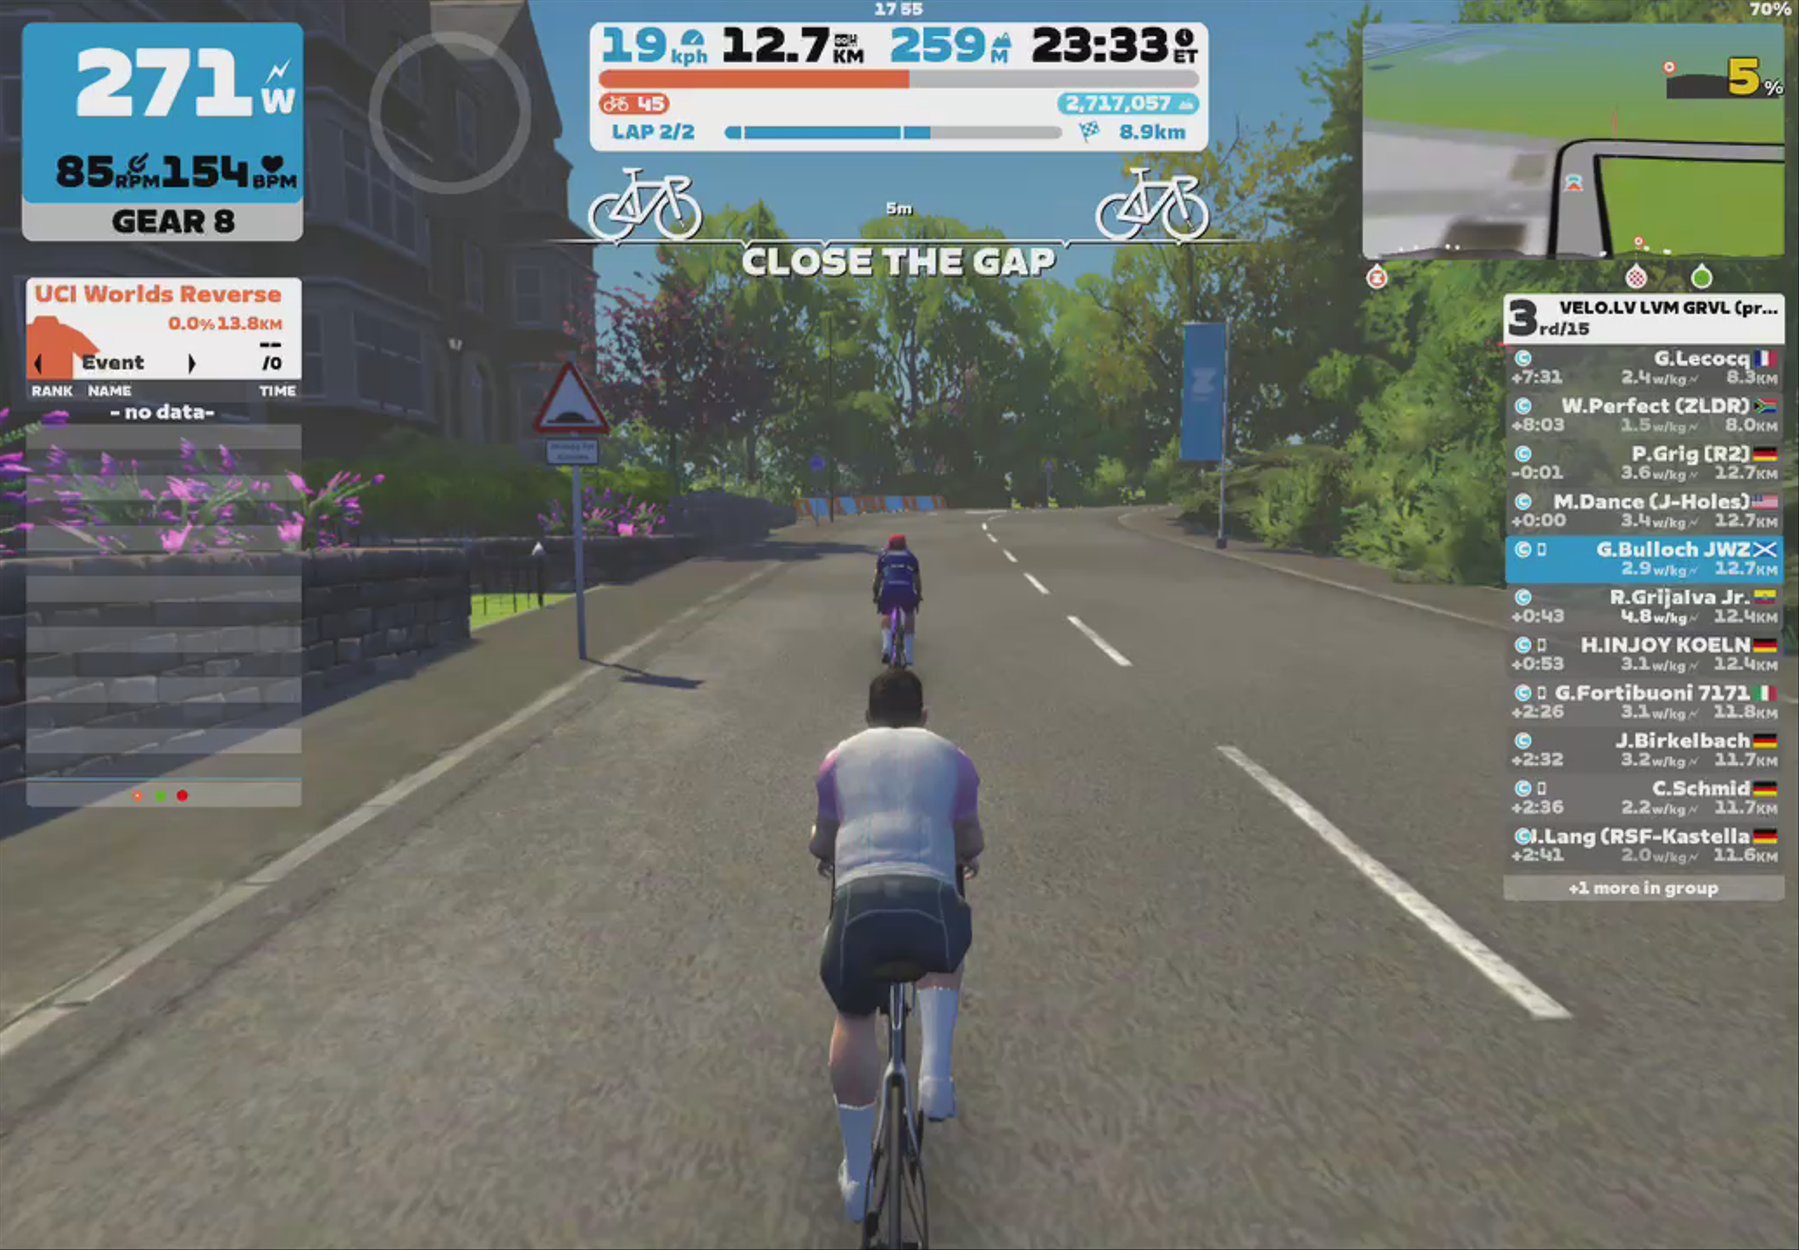 Zwift - Race: VELO.LV LVM GRVL (prep race) (C) on Tour Of Tewit Well in Yorkshire